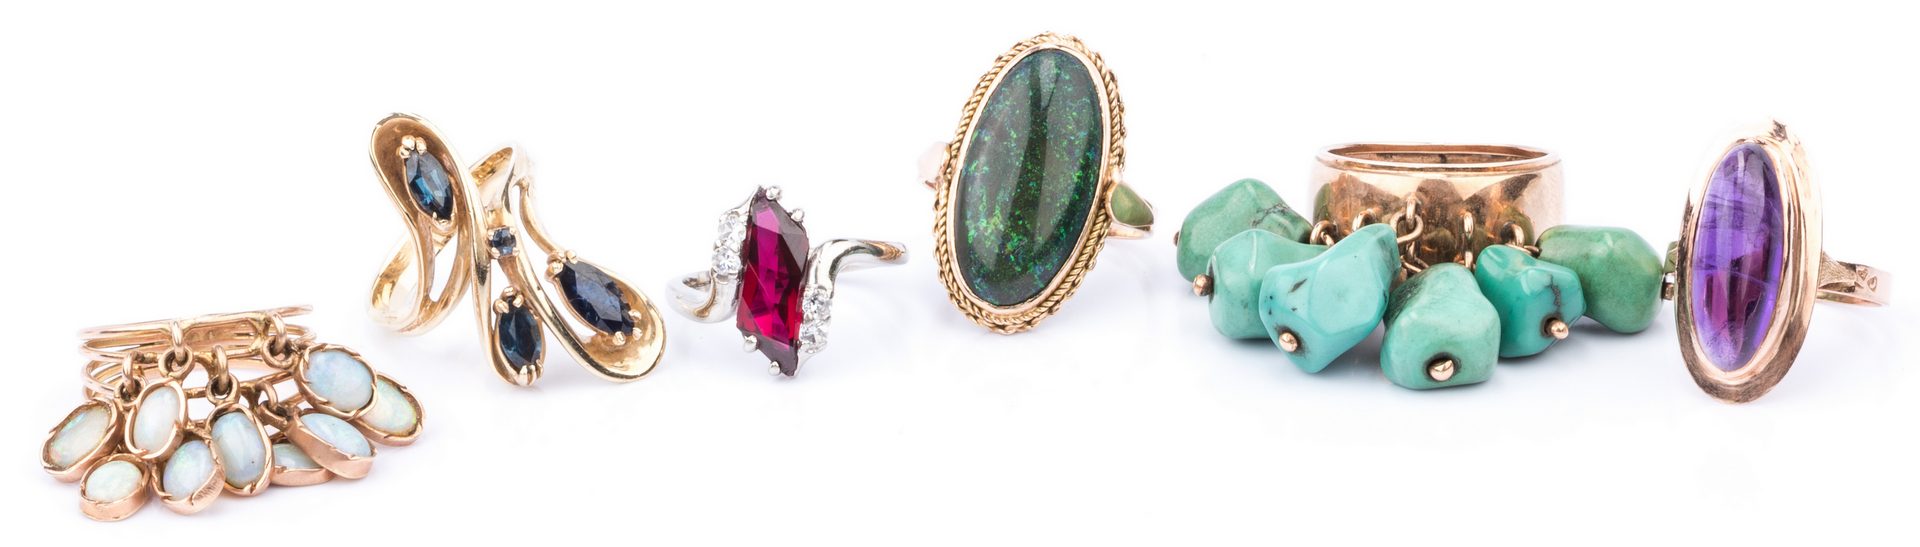 Lot 381: Group of 9 Cocktail Rings